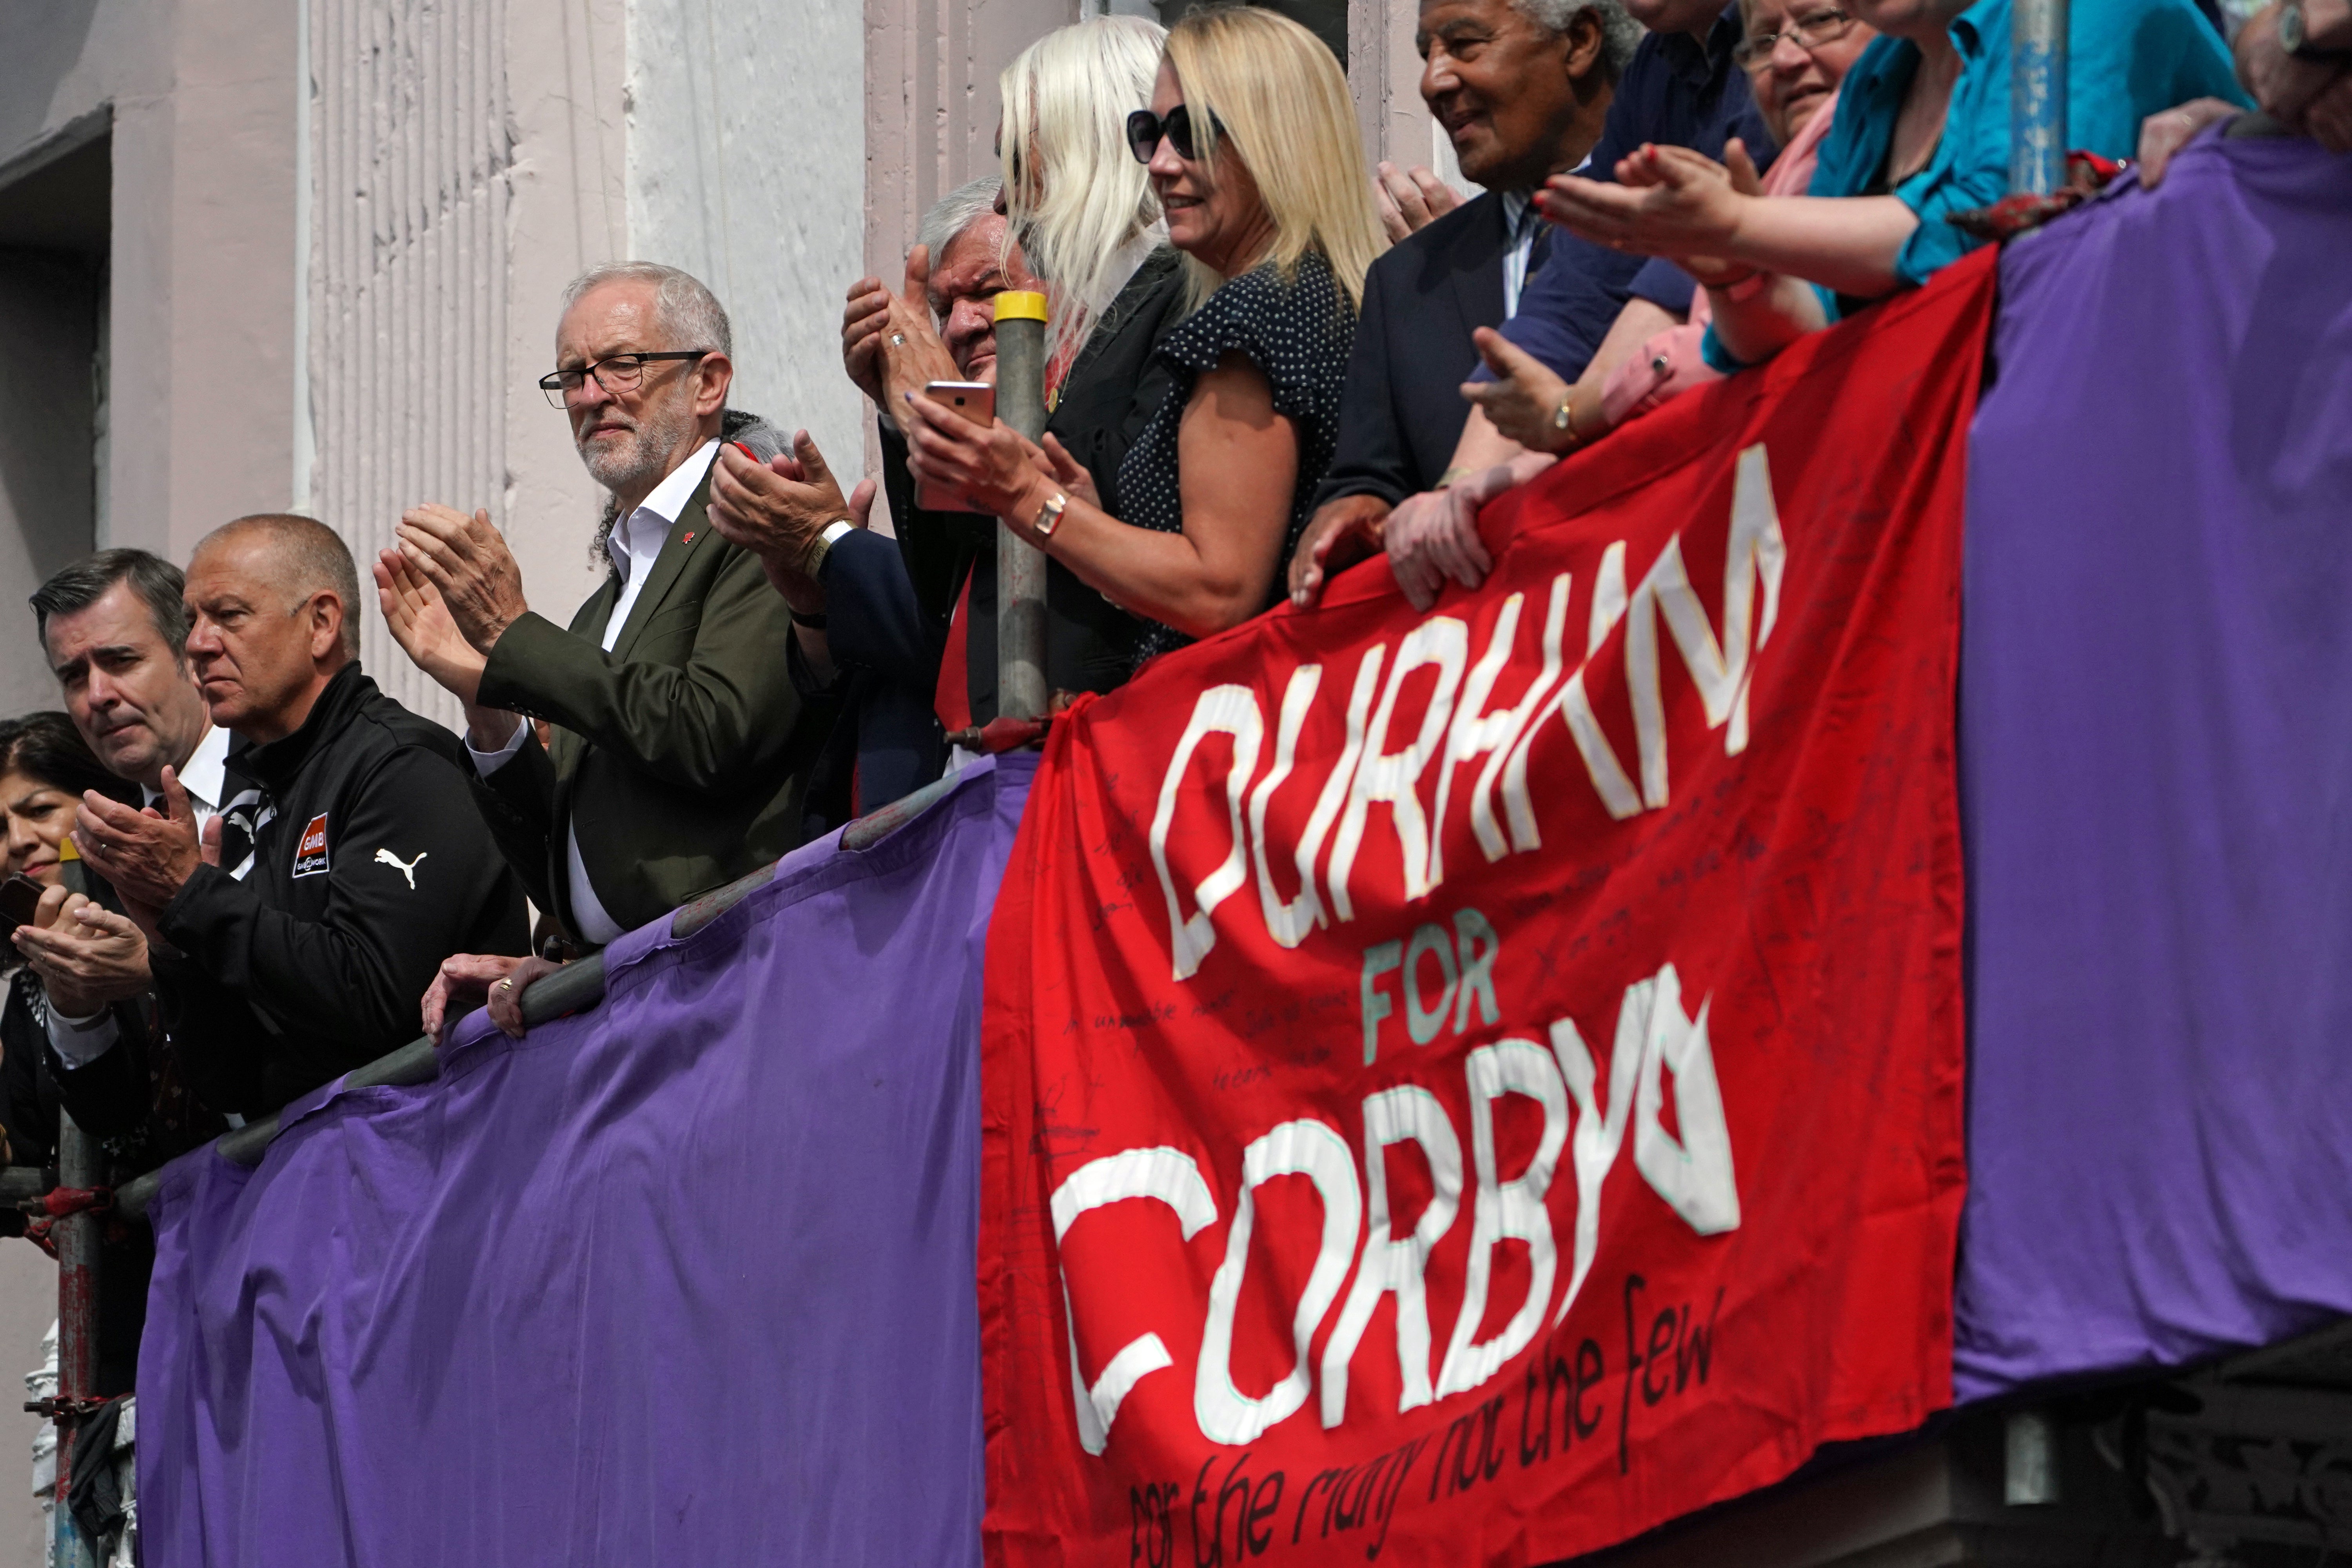 Labour leader Jeremy Corbyn watches the procession from the hotel balcony (PA)